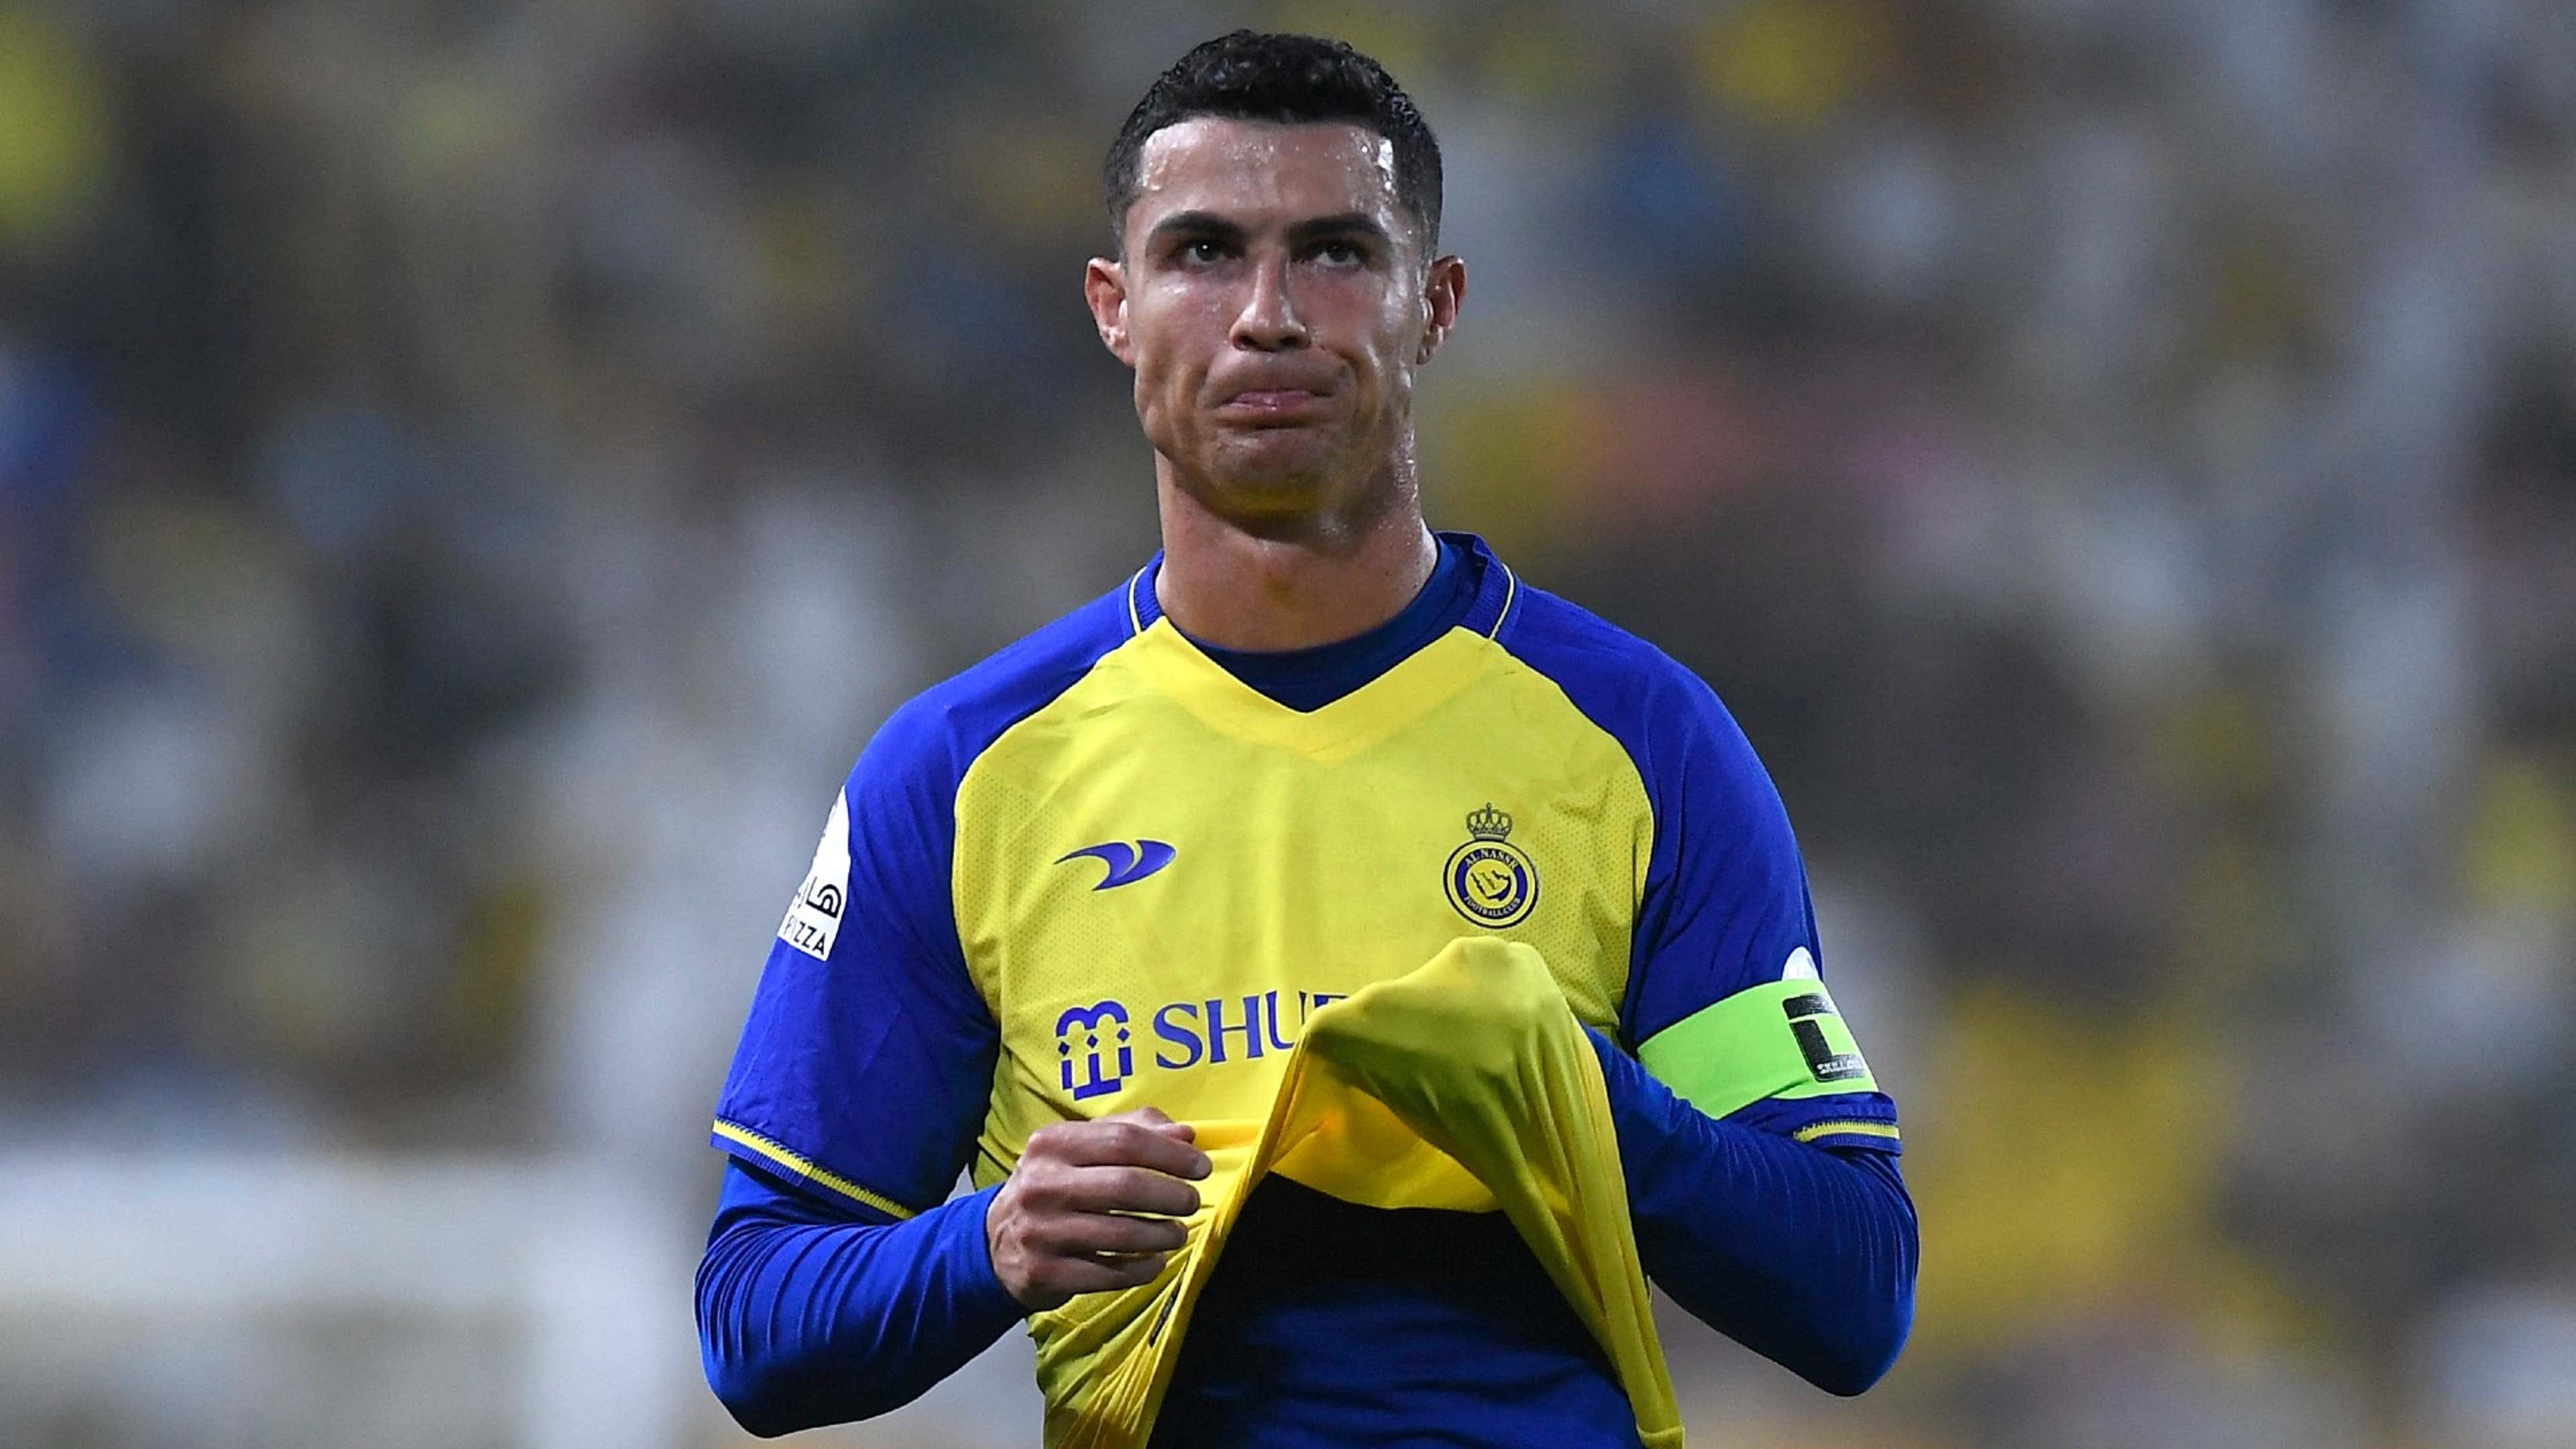 Is Cristiano Ronaldo playing today against Messi? Latest news on CR7 injury  status for Al Nassr vs. Inter Miami match